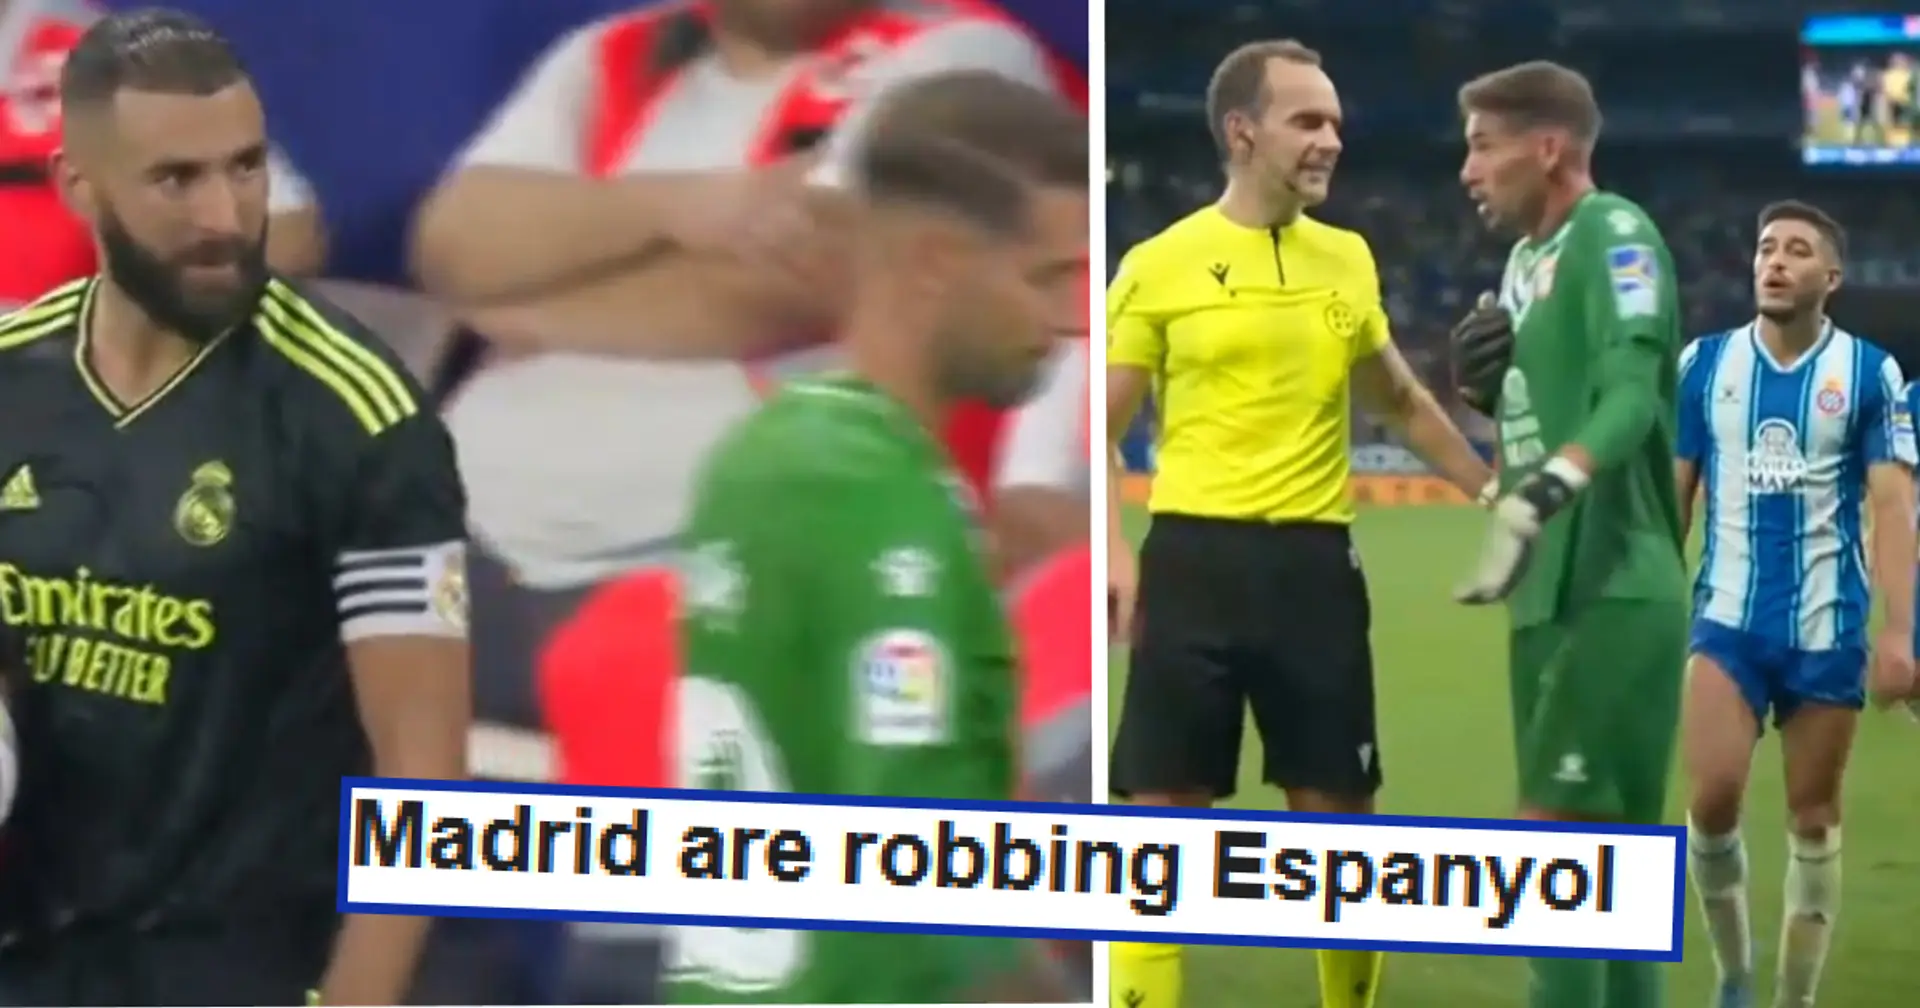 'VARdrid indeed': Espanyol keeper controversially sent off against Real Madrid in 96th minute